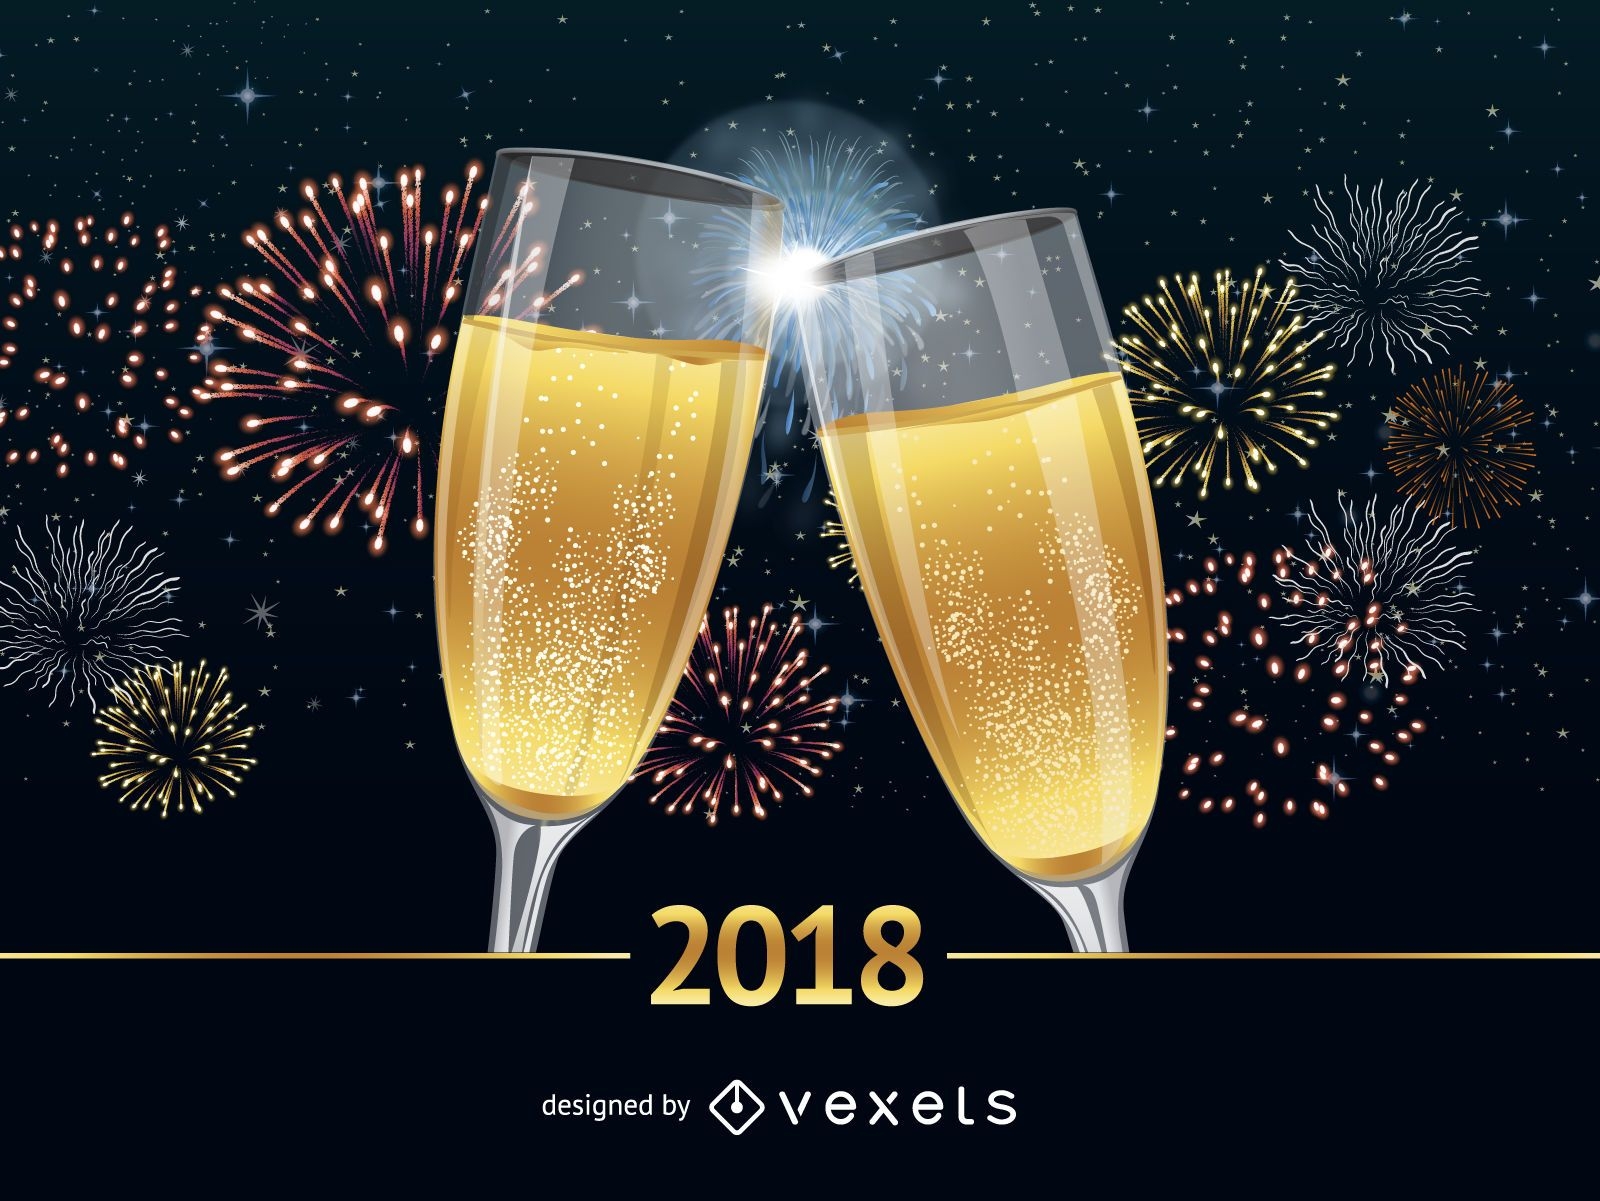 2018 New Year cheers poster